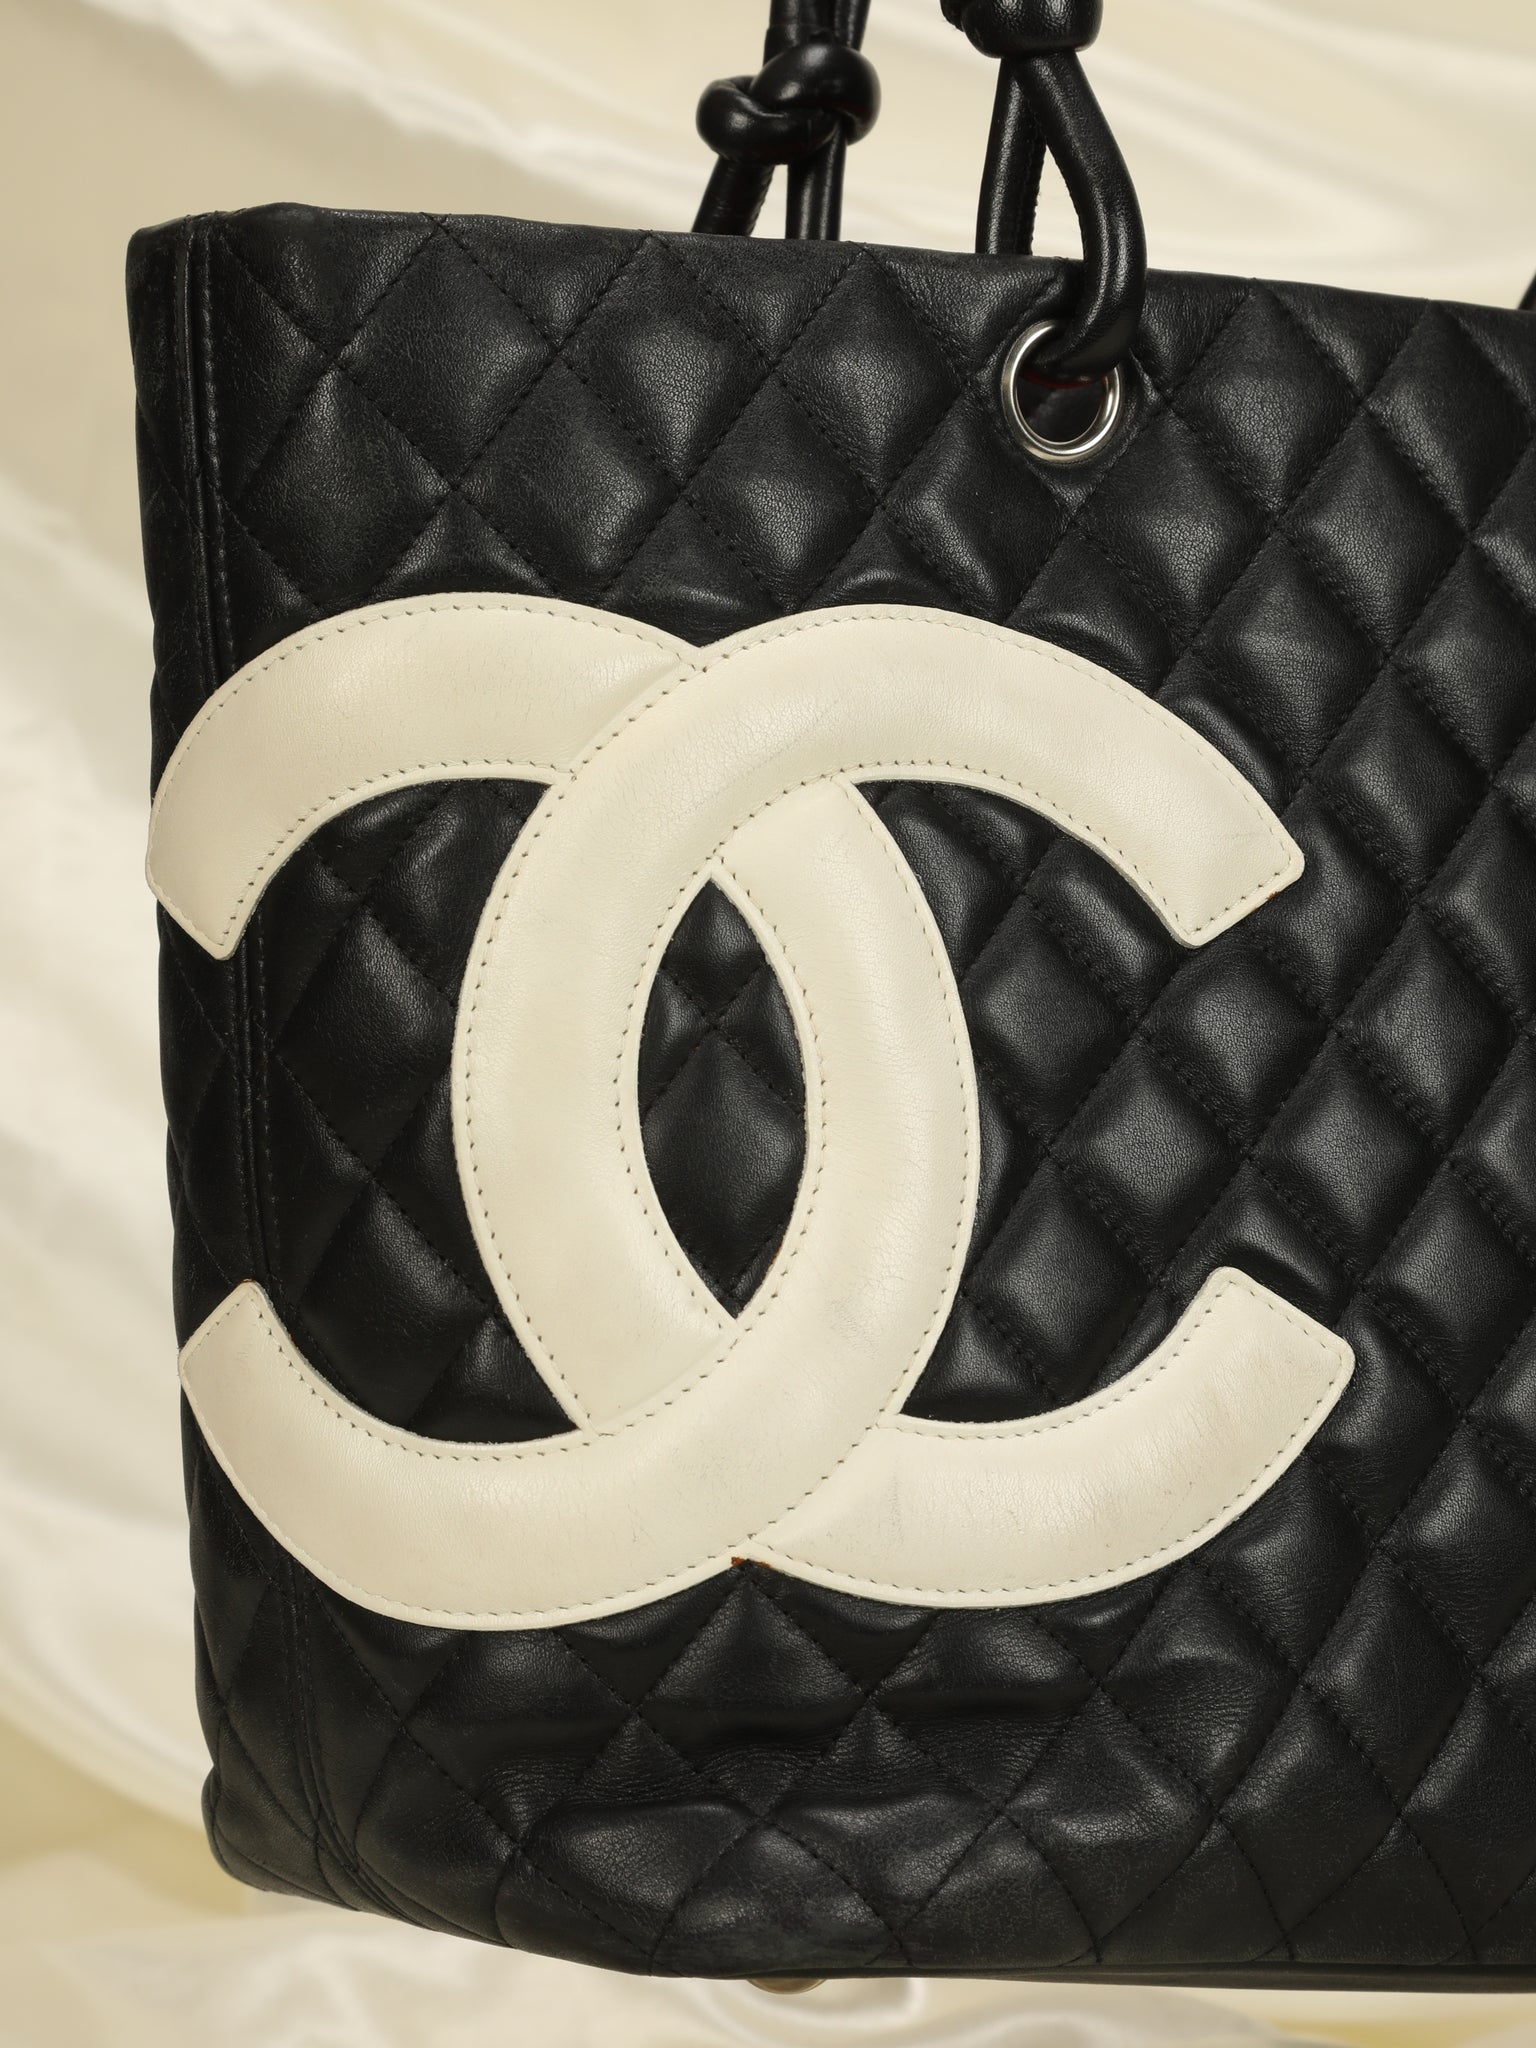 Chanel Black And White Quilted Lambskin Mini Flap Bag Gold Hardware, 2021  Available For Immediate Sale At Sotheby's